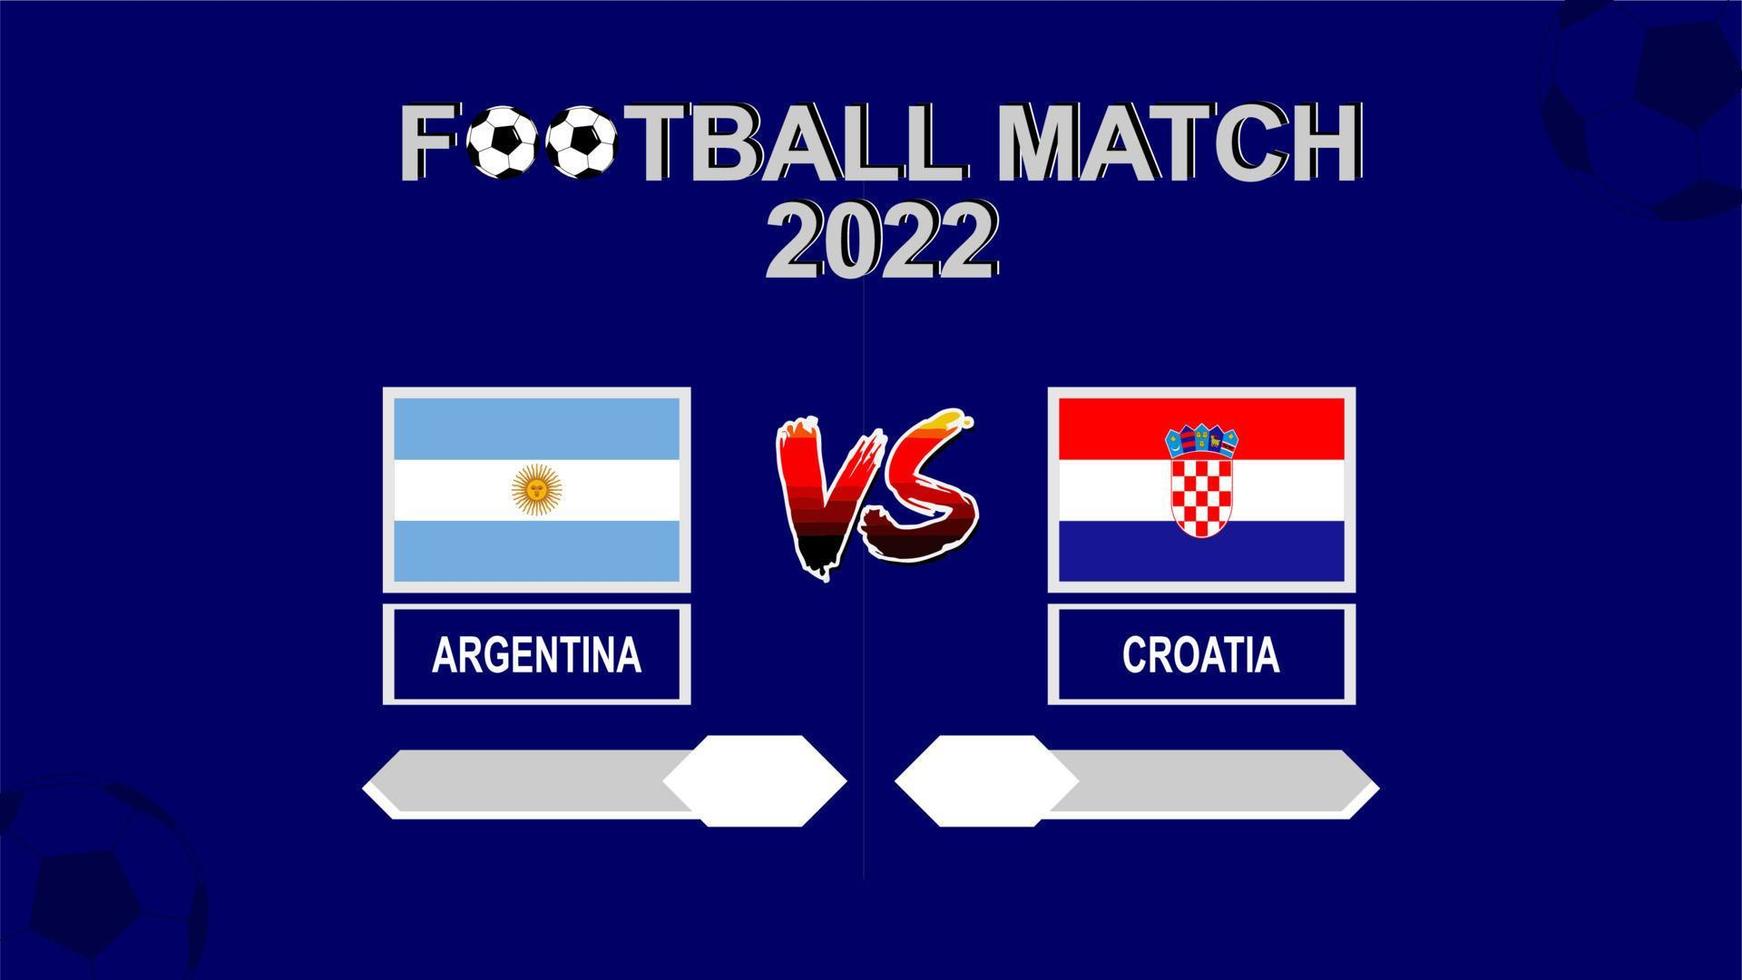 Argentina vs Croatia football cup 2022 blue template background vector for schedule or result match semi final